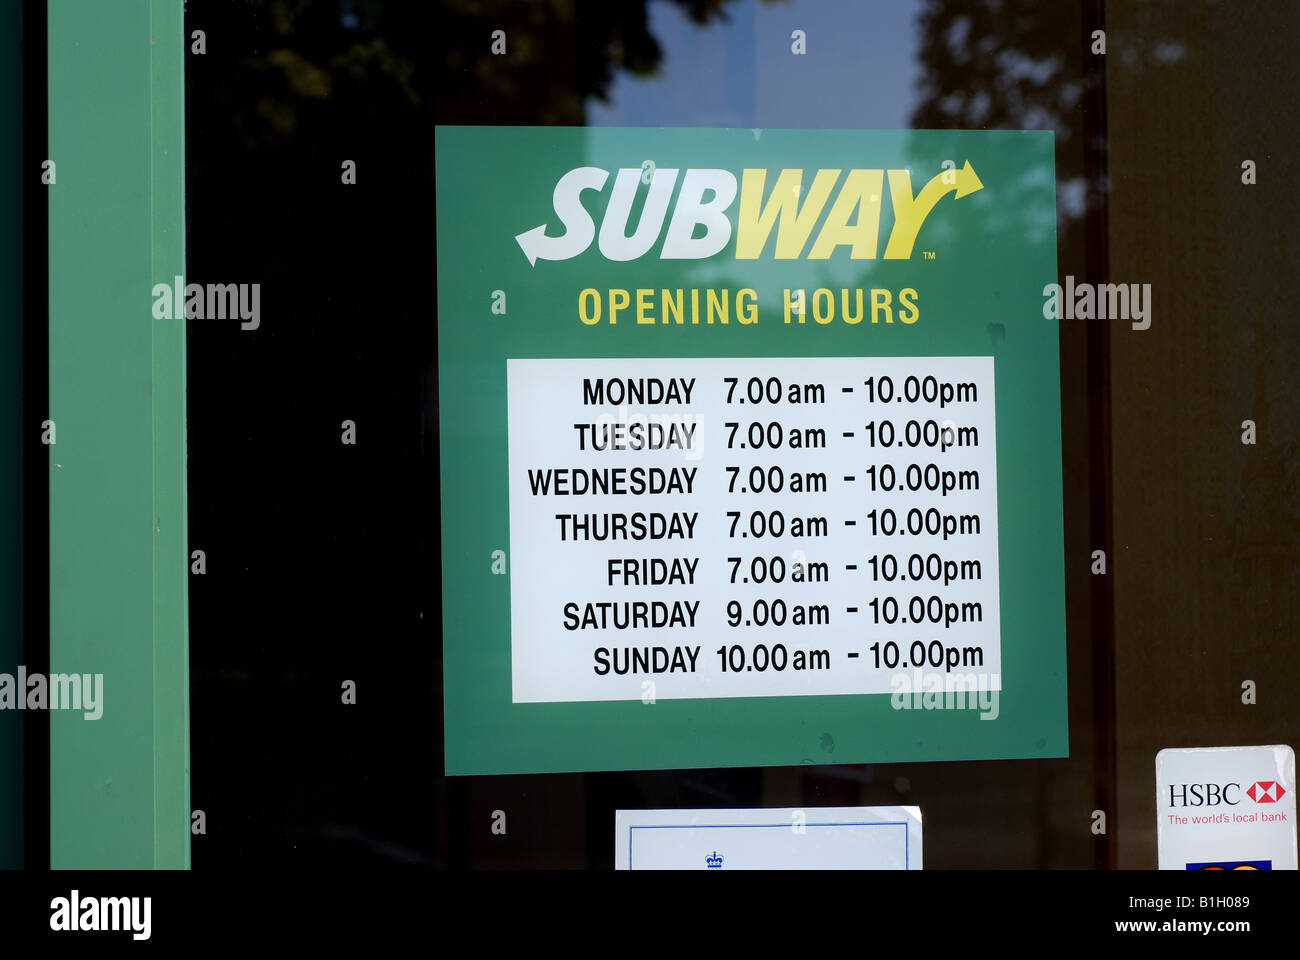 Subway food outlet opening hours sign, UK Stock Photo 